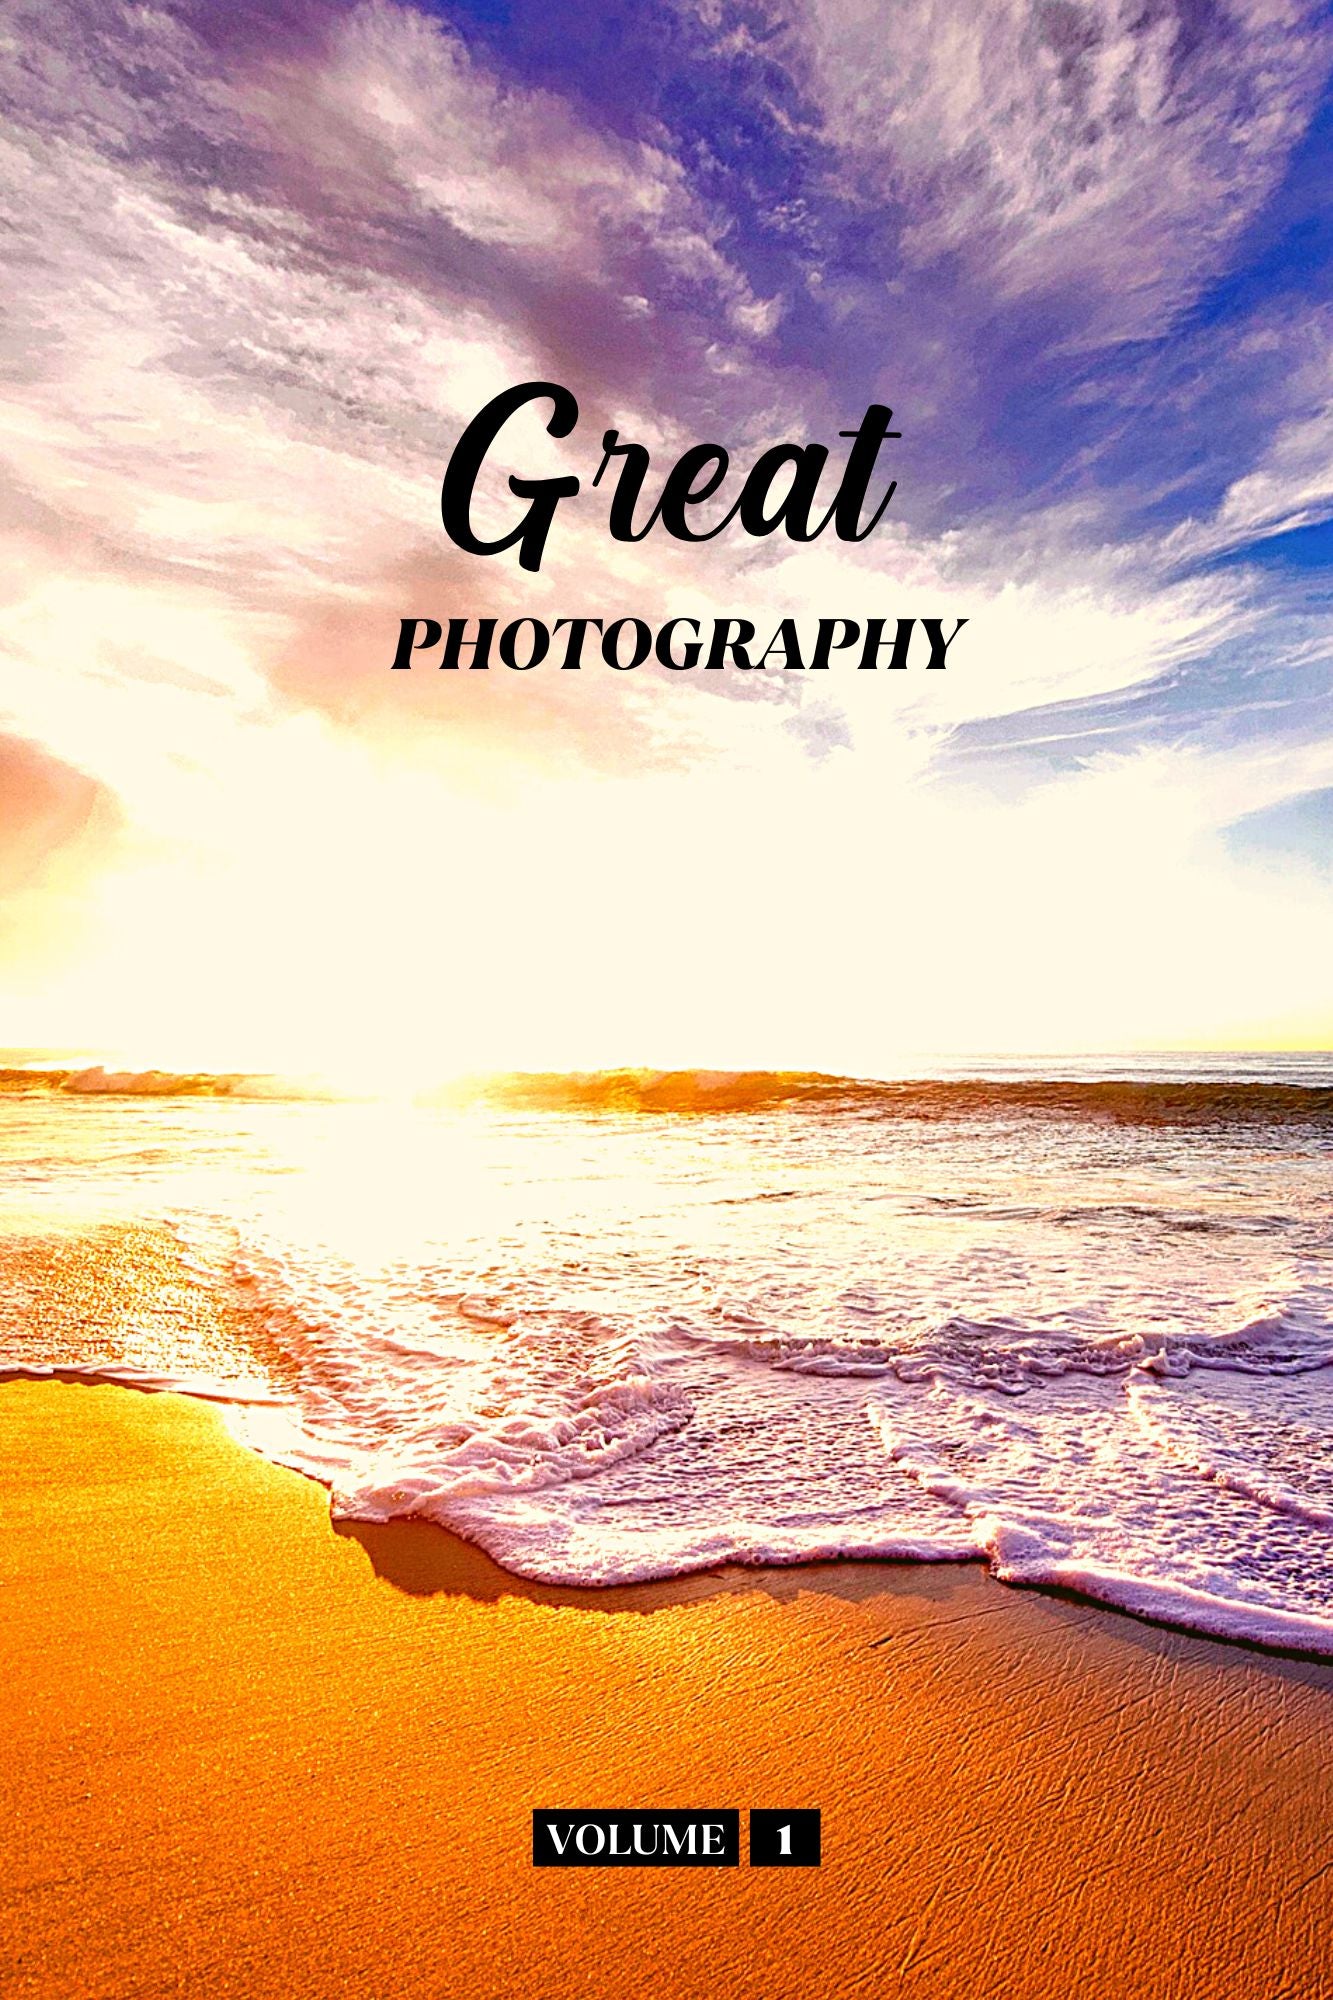 Great Photography Volume 1 (Physical Book)